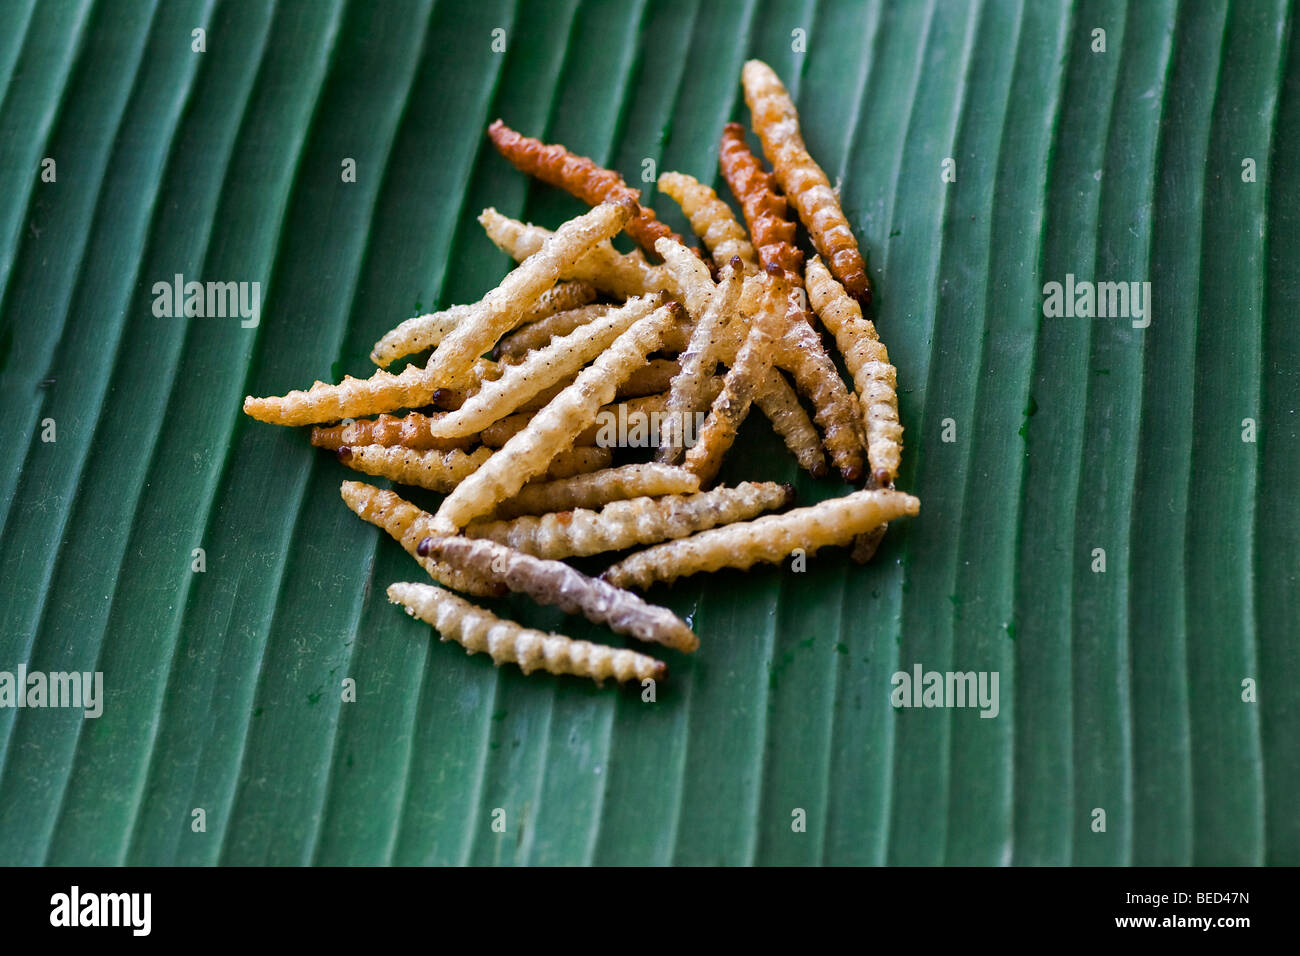 Deep-fried grubs on a banana leaf offered for eating Stock Photo